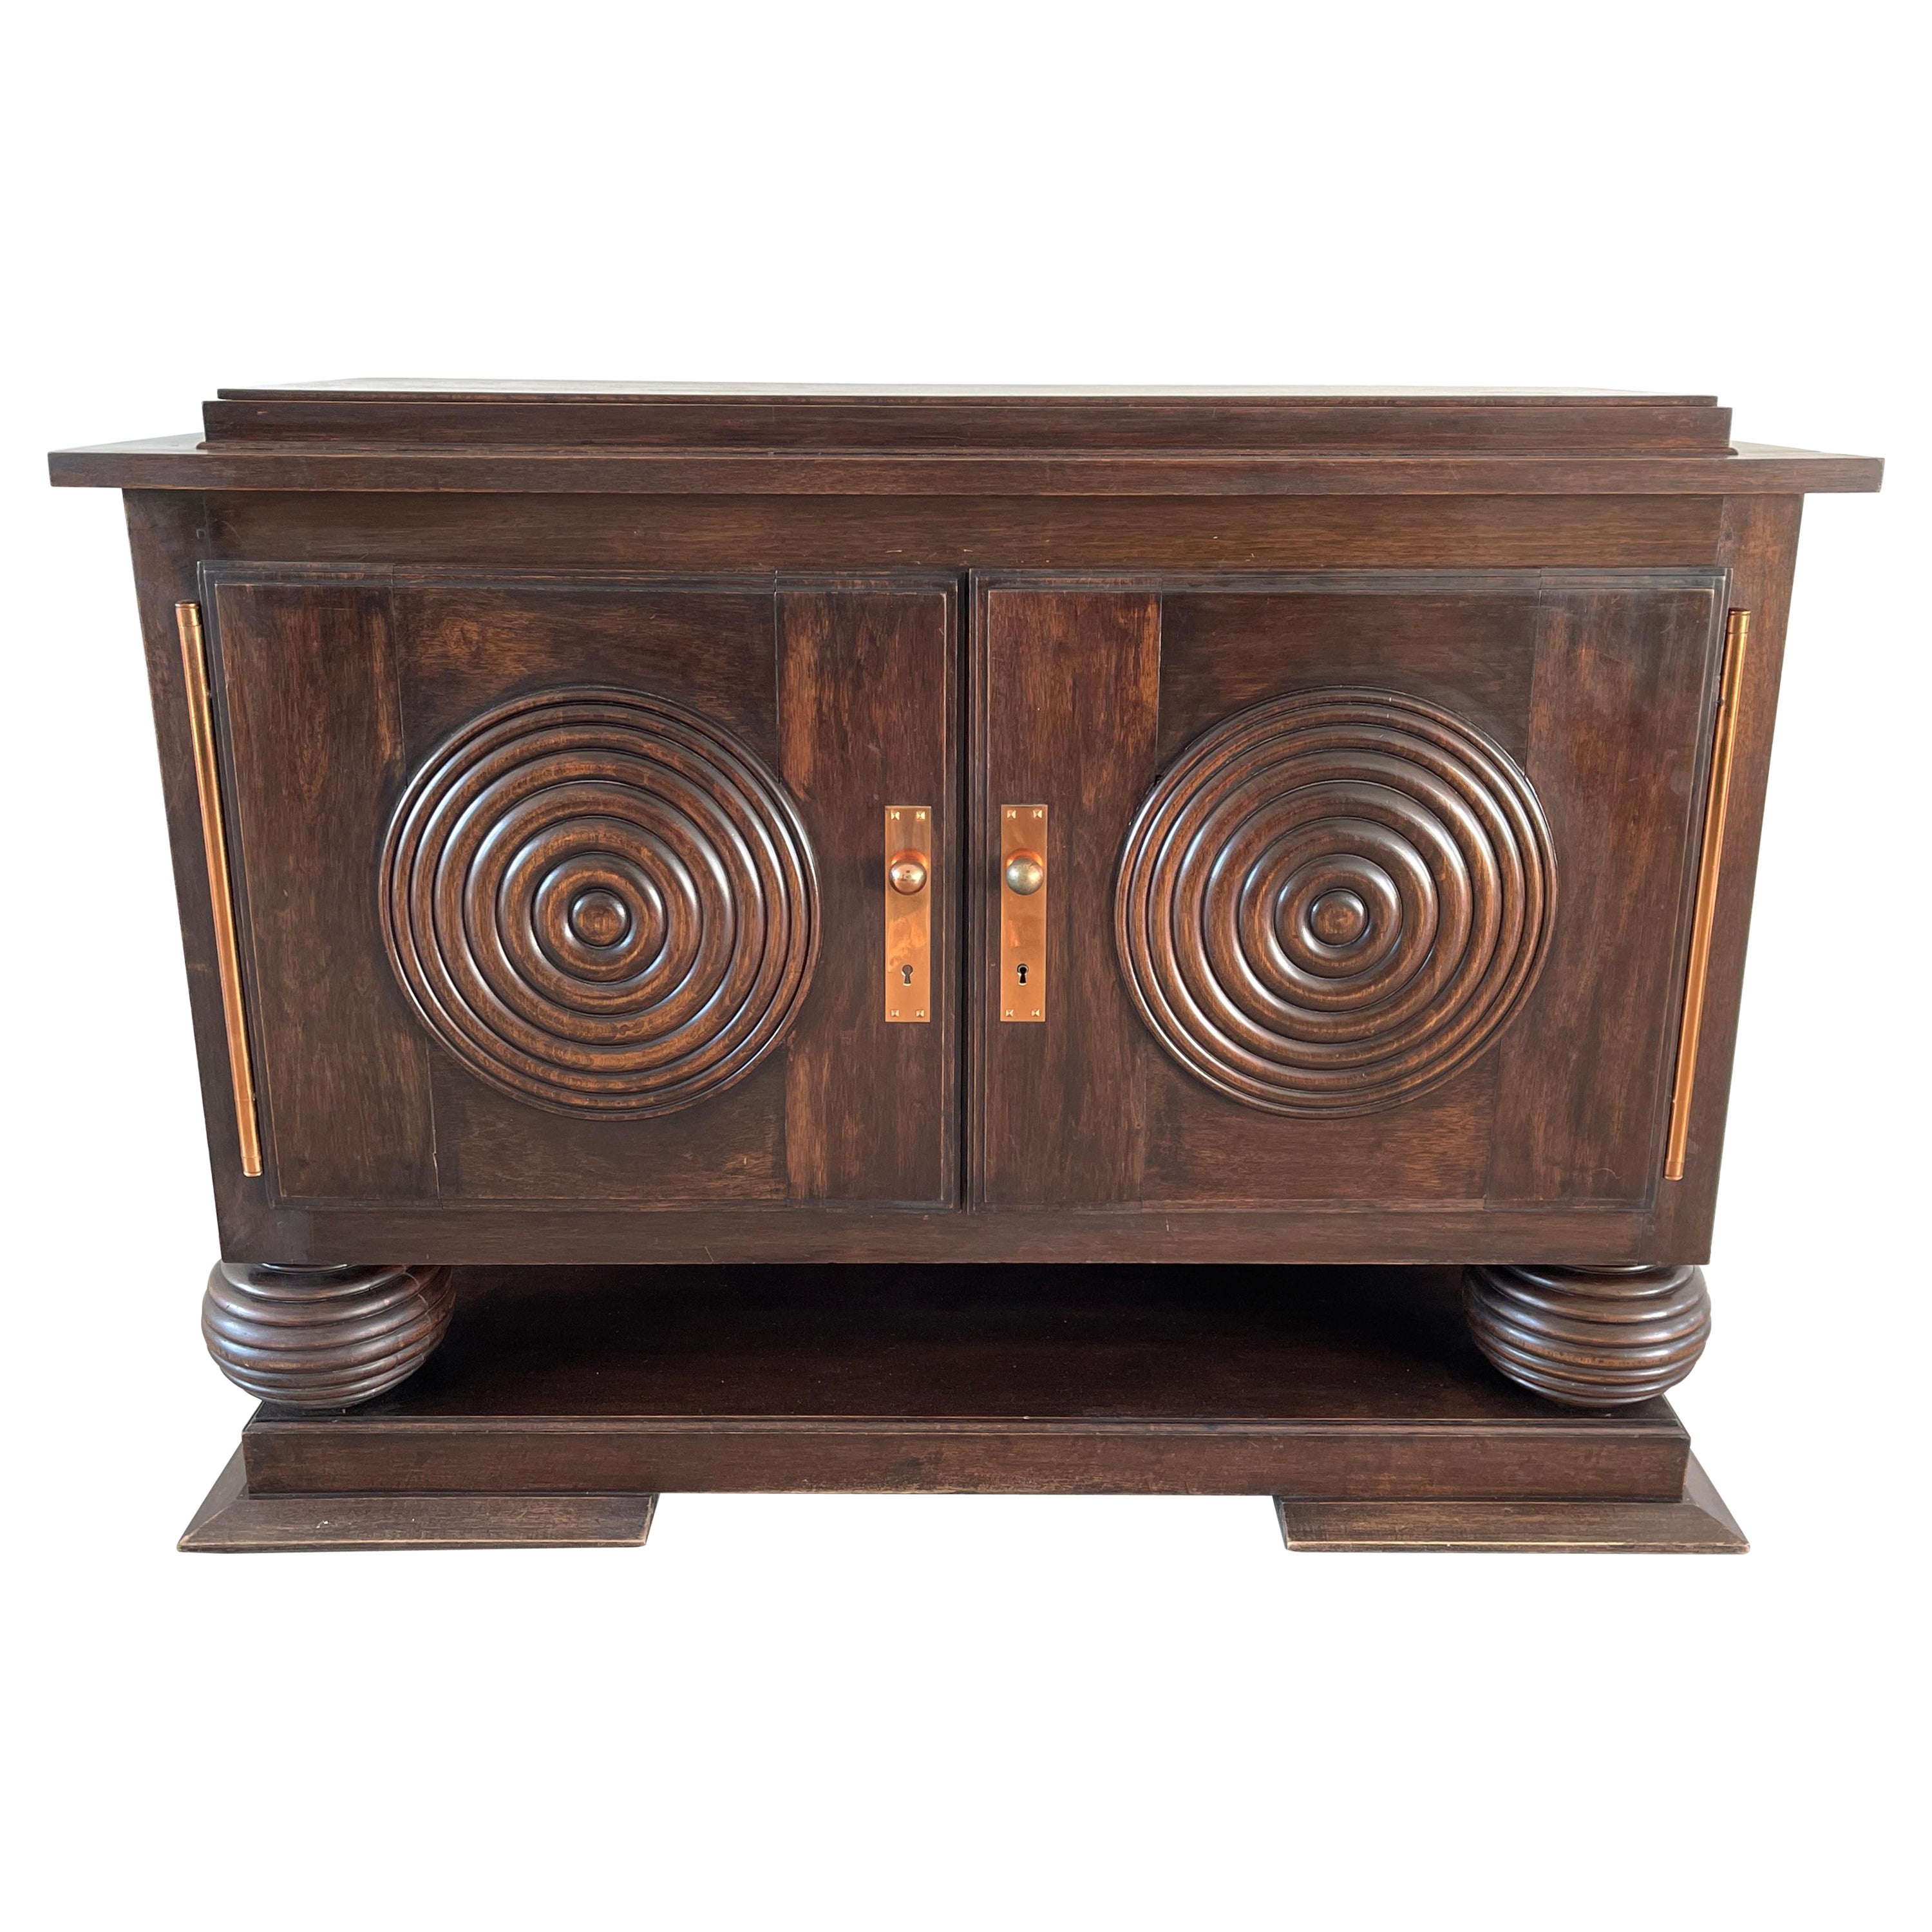 Charles Dudouyt Cabinet